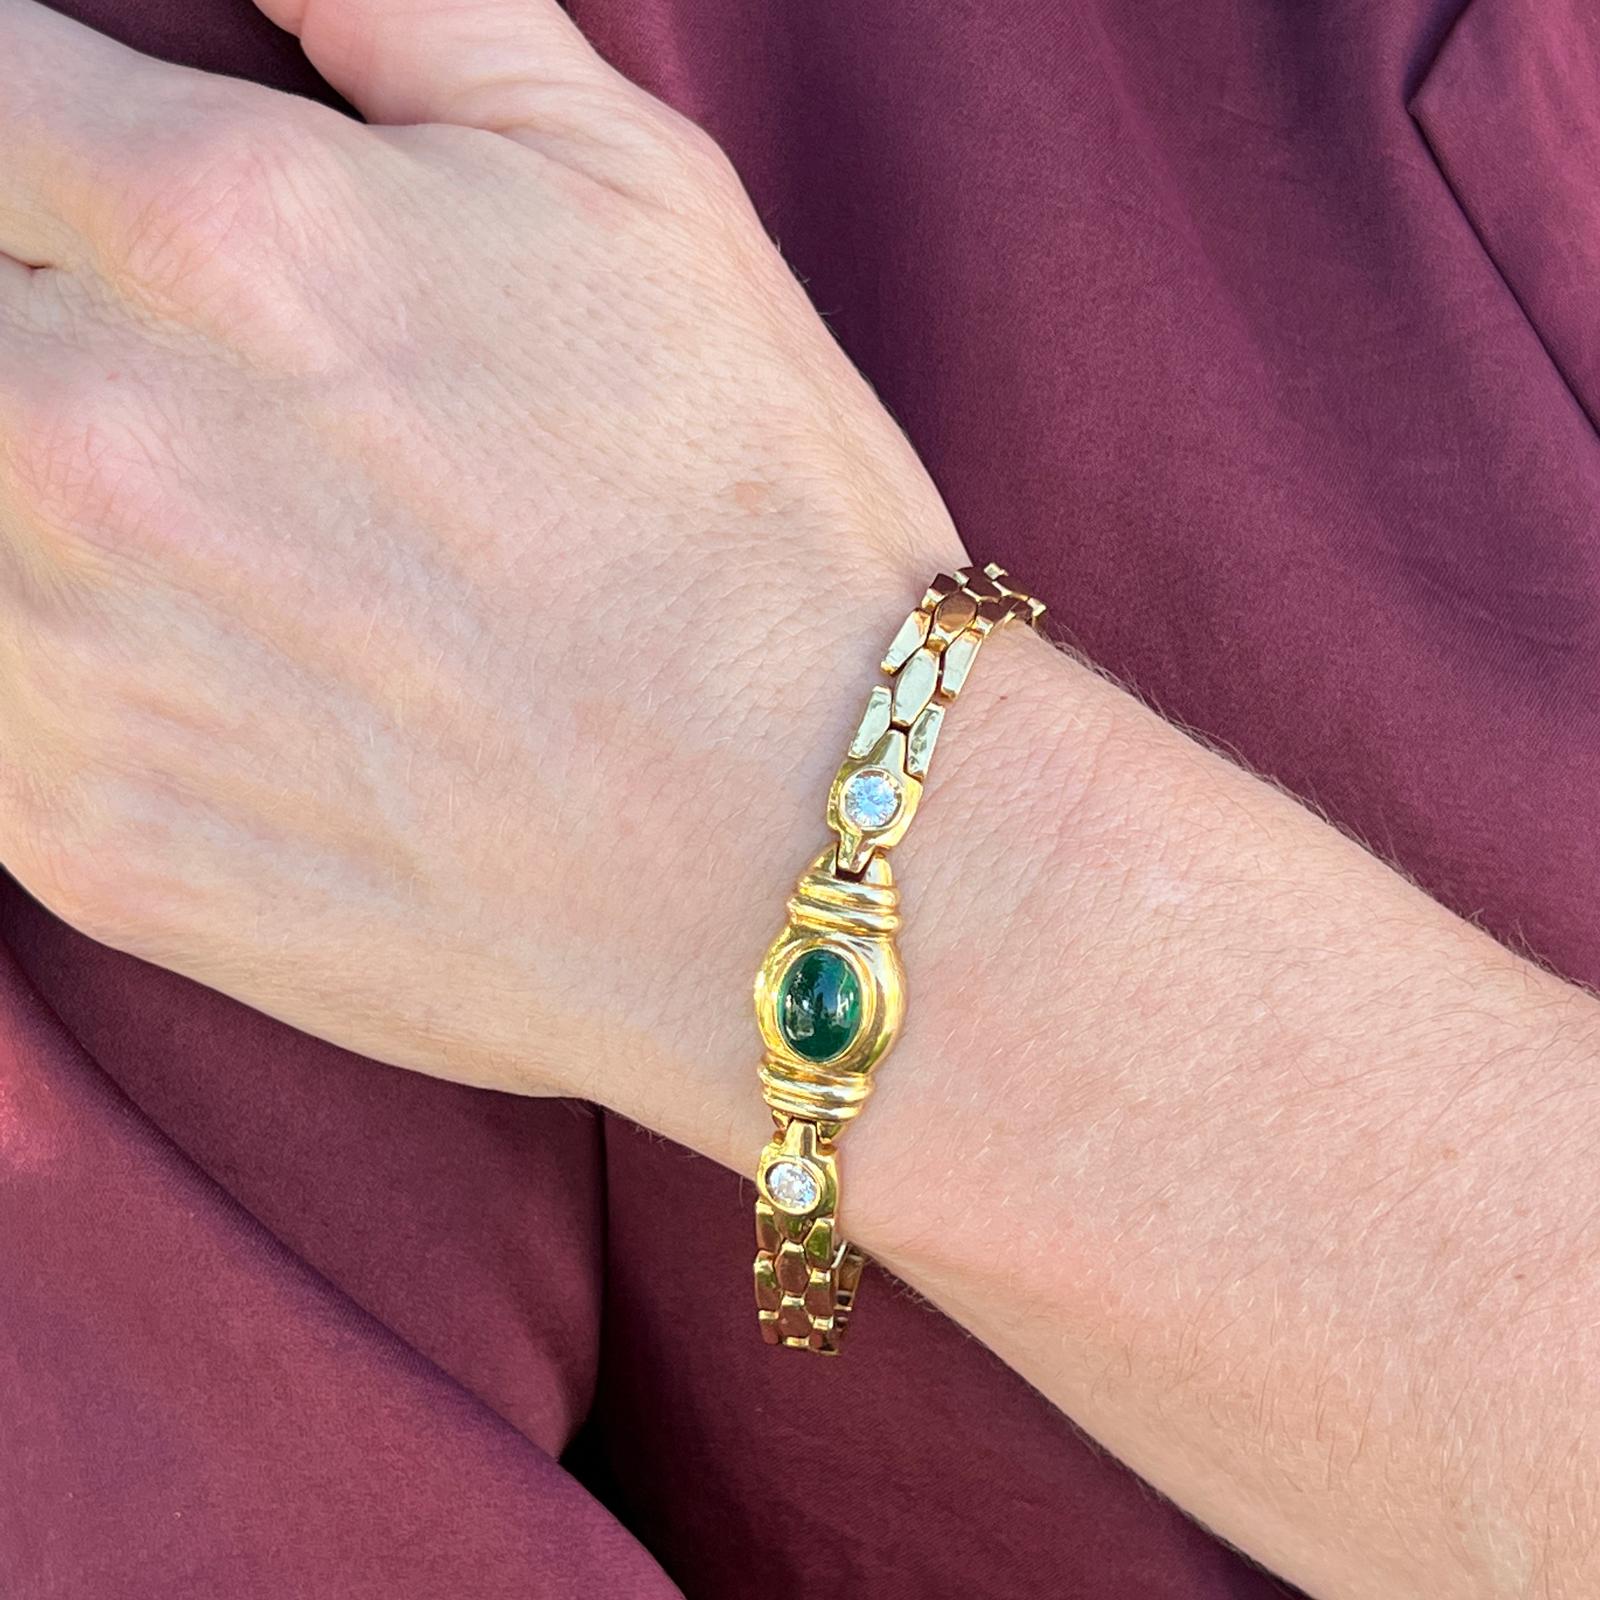 Emerald and diamond link bracelet fashioned in 18 karat yellow gold. The bracelet features an approximately 3.75 carat oval cabochon emerald flanked by 2 round briliant cut diamonds weighing .50 carat total weight. The diamonds are graded G-H color